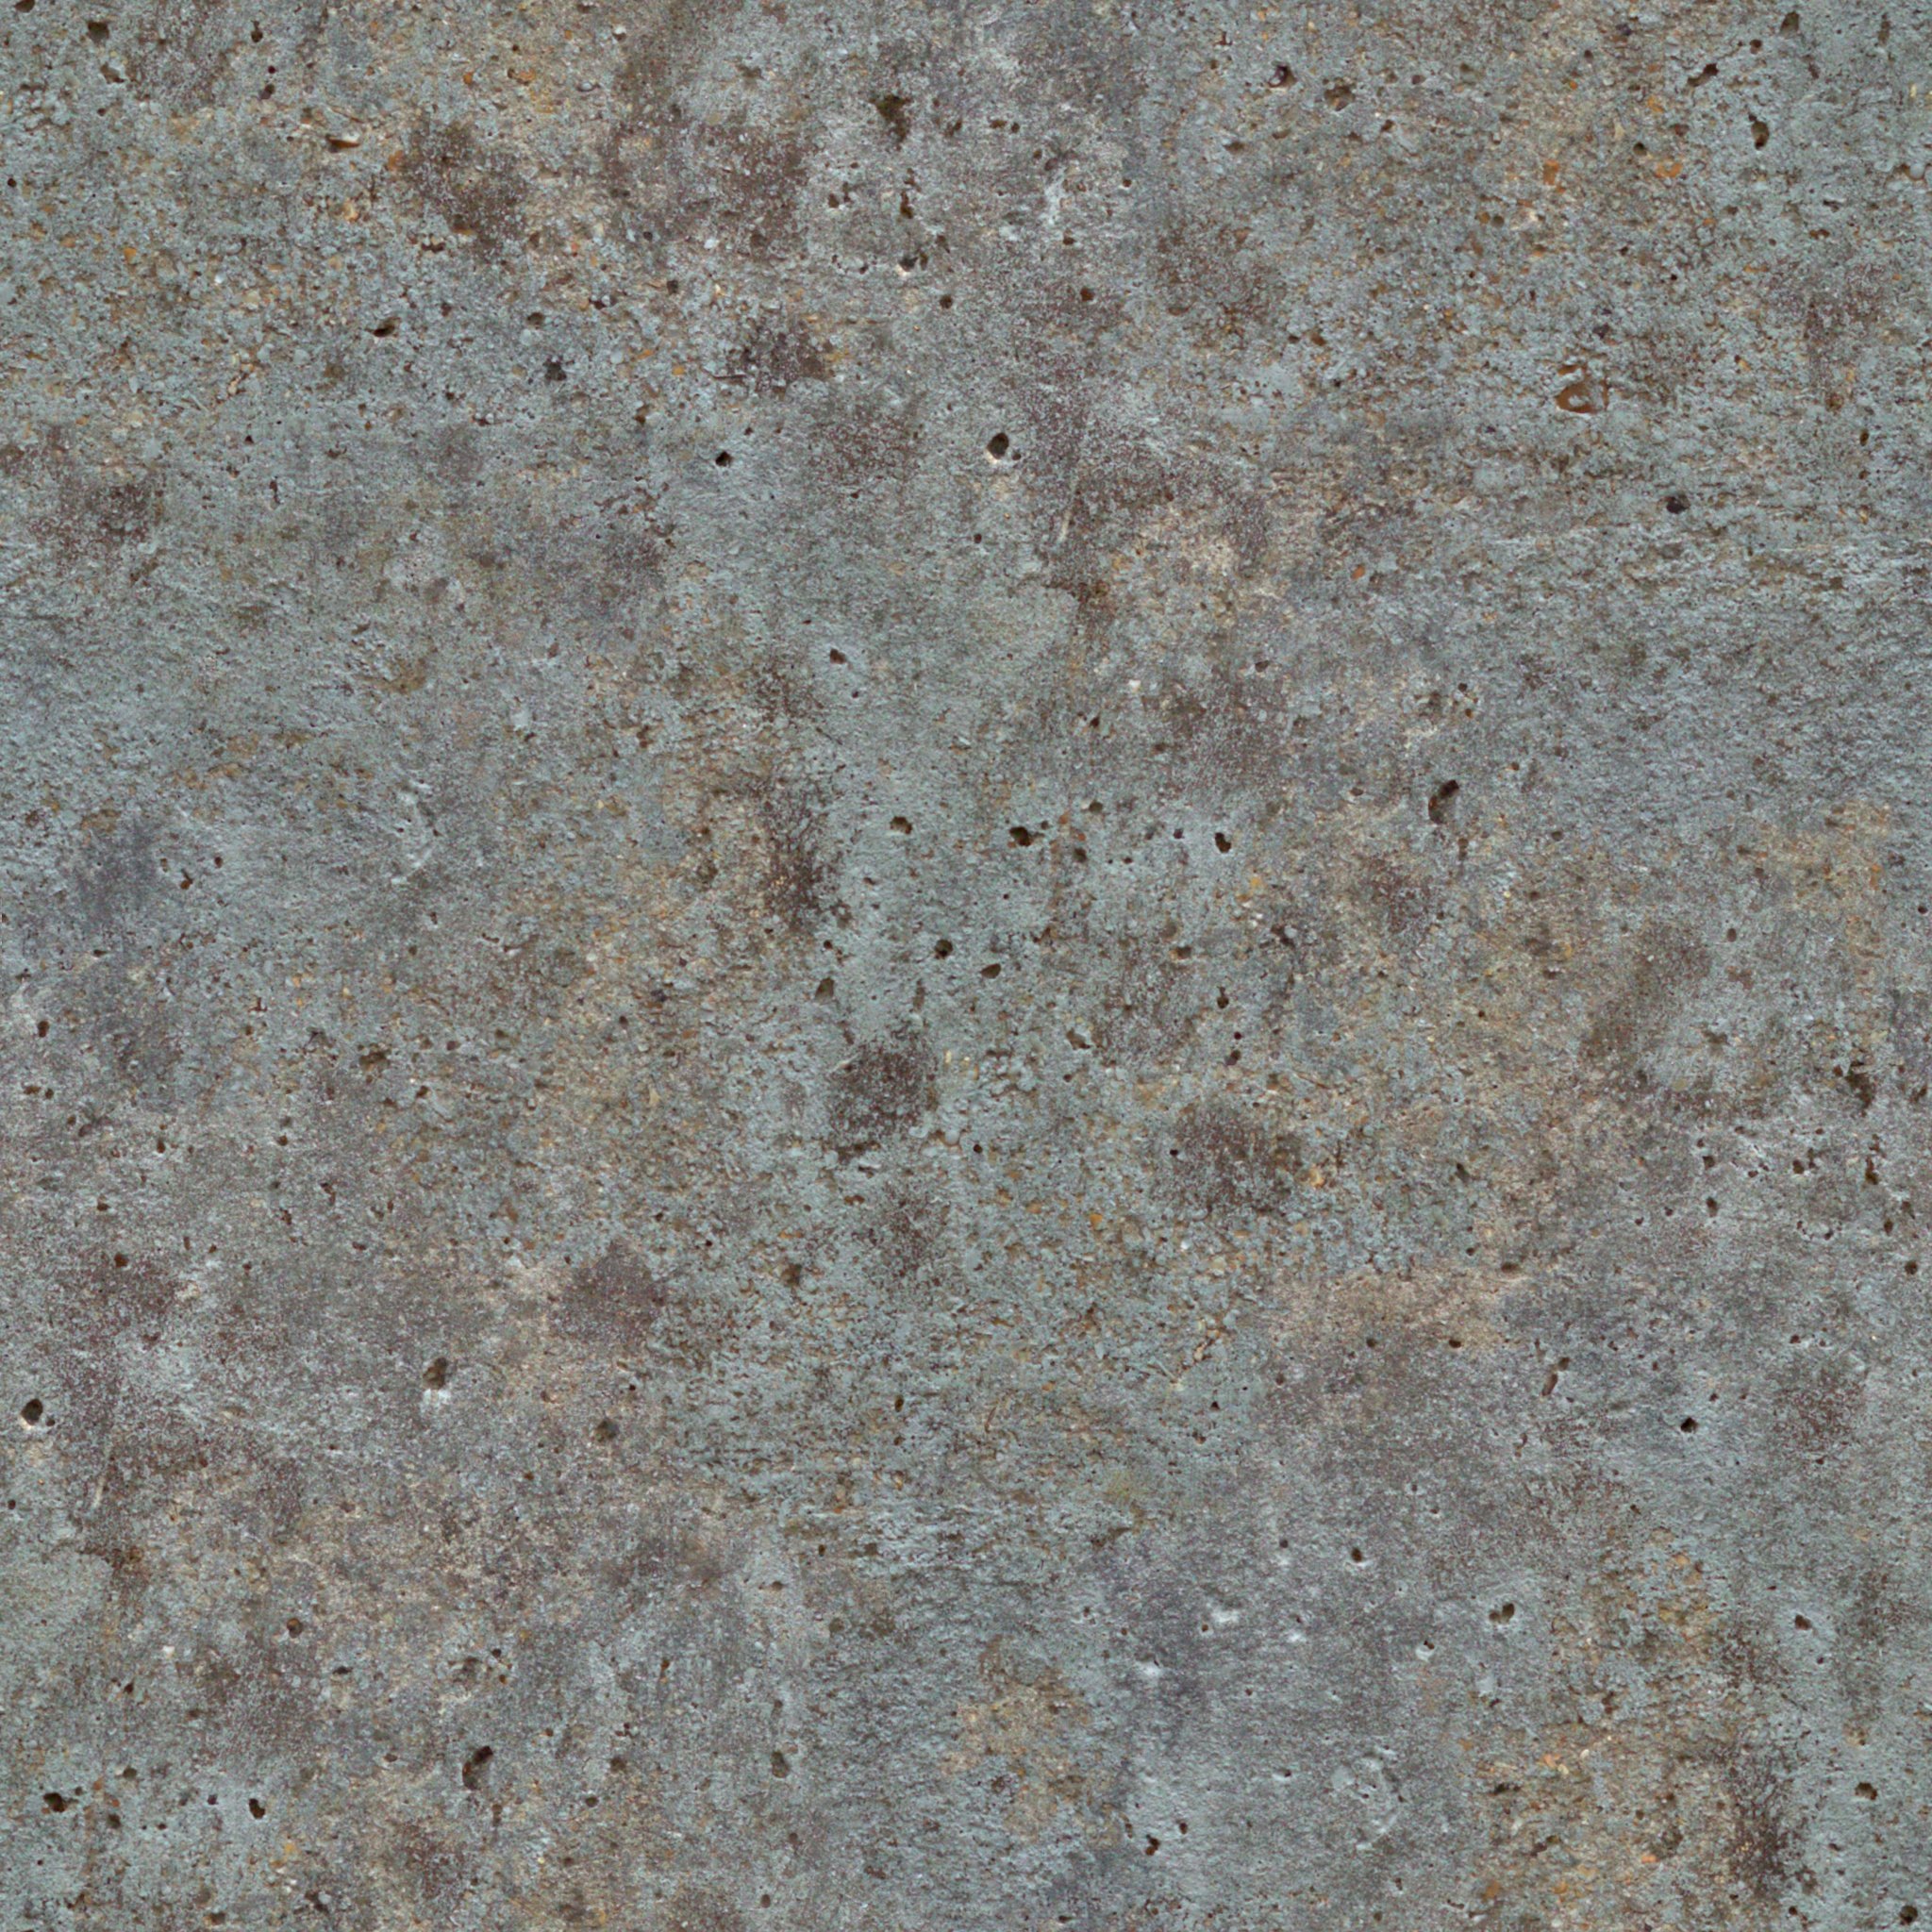 Rough Coloured Concrete | OpenGameArt.org